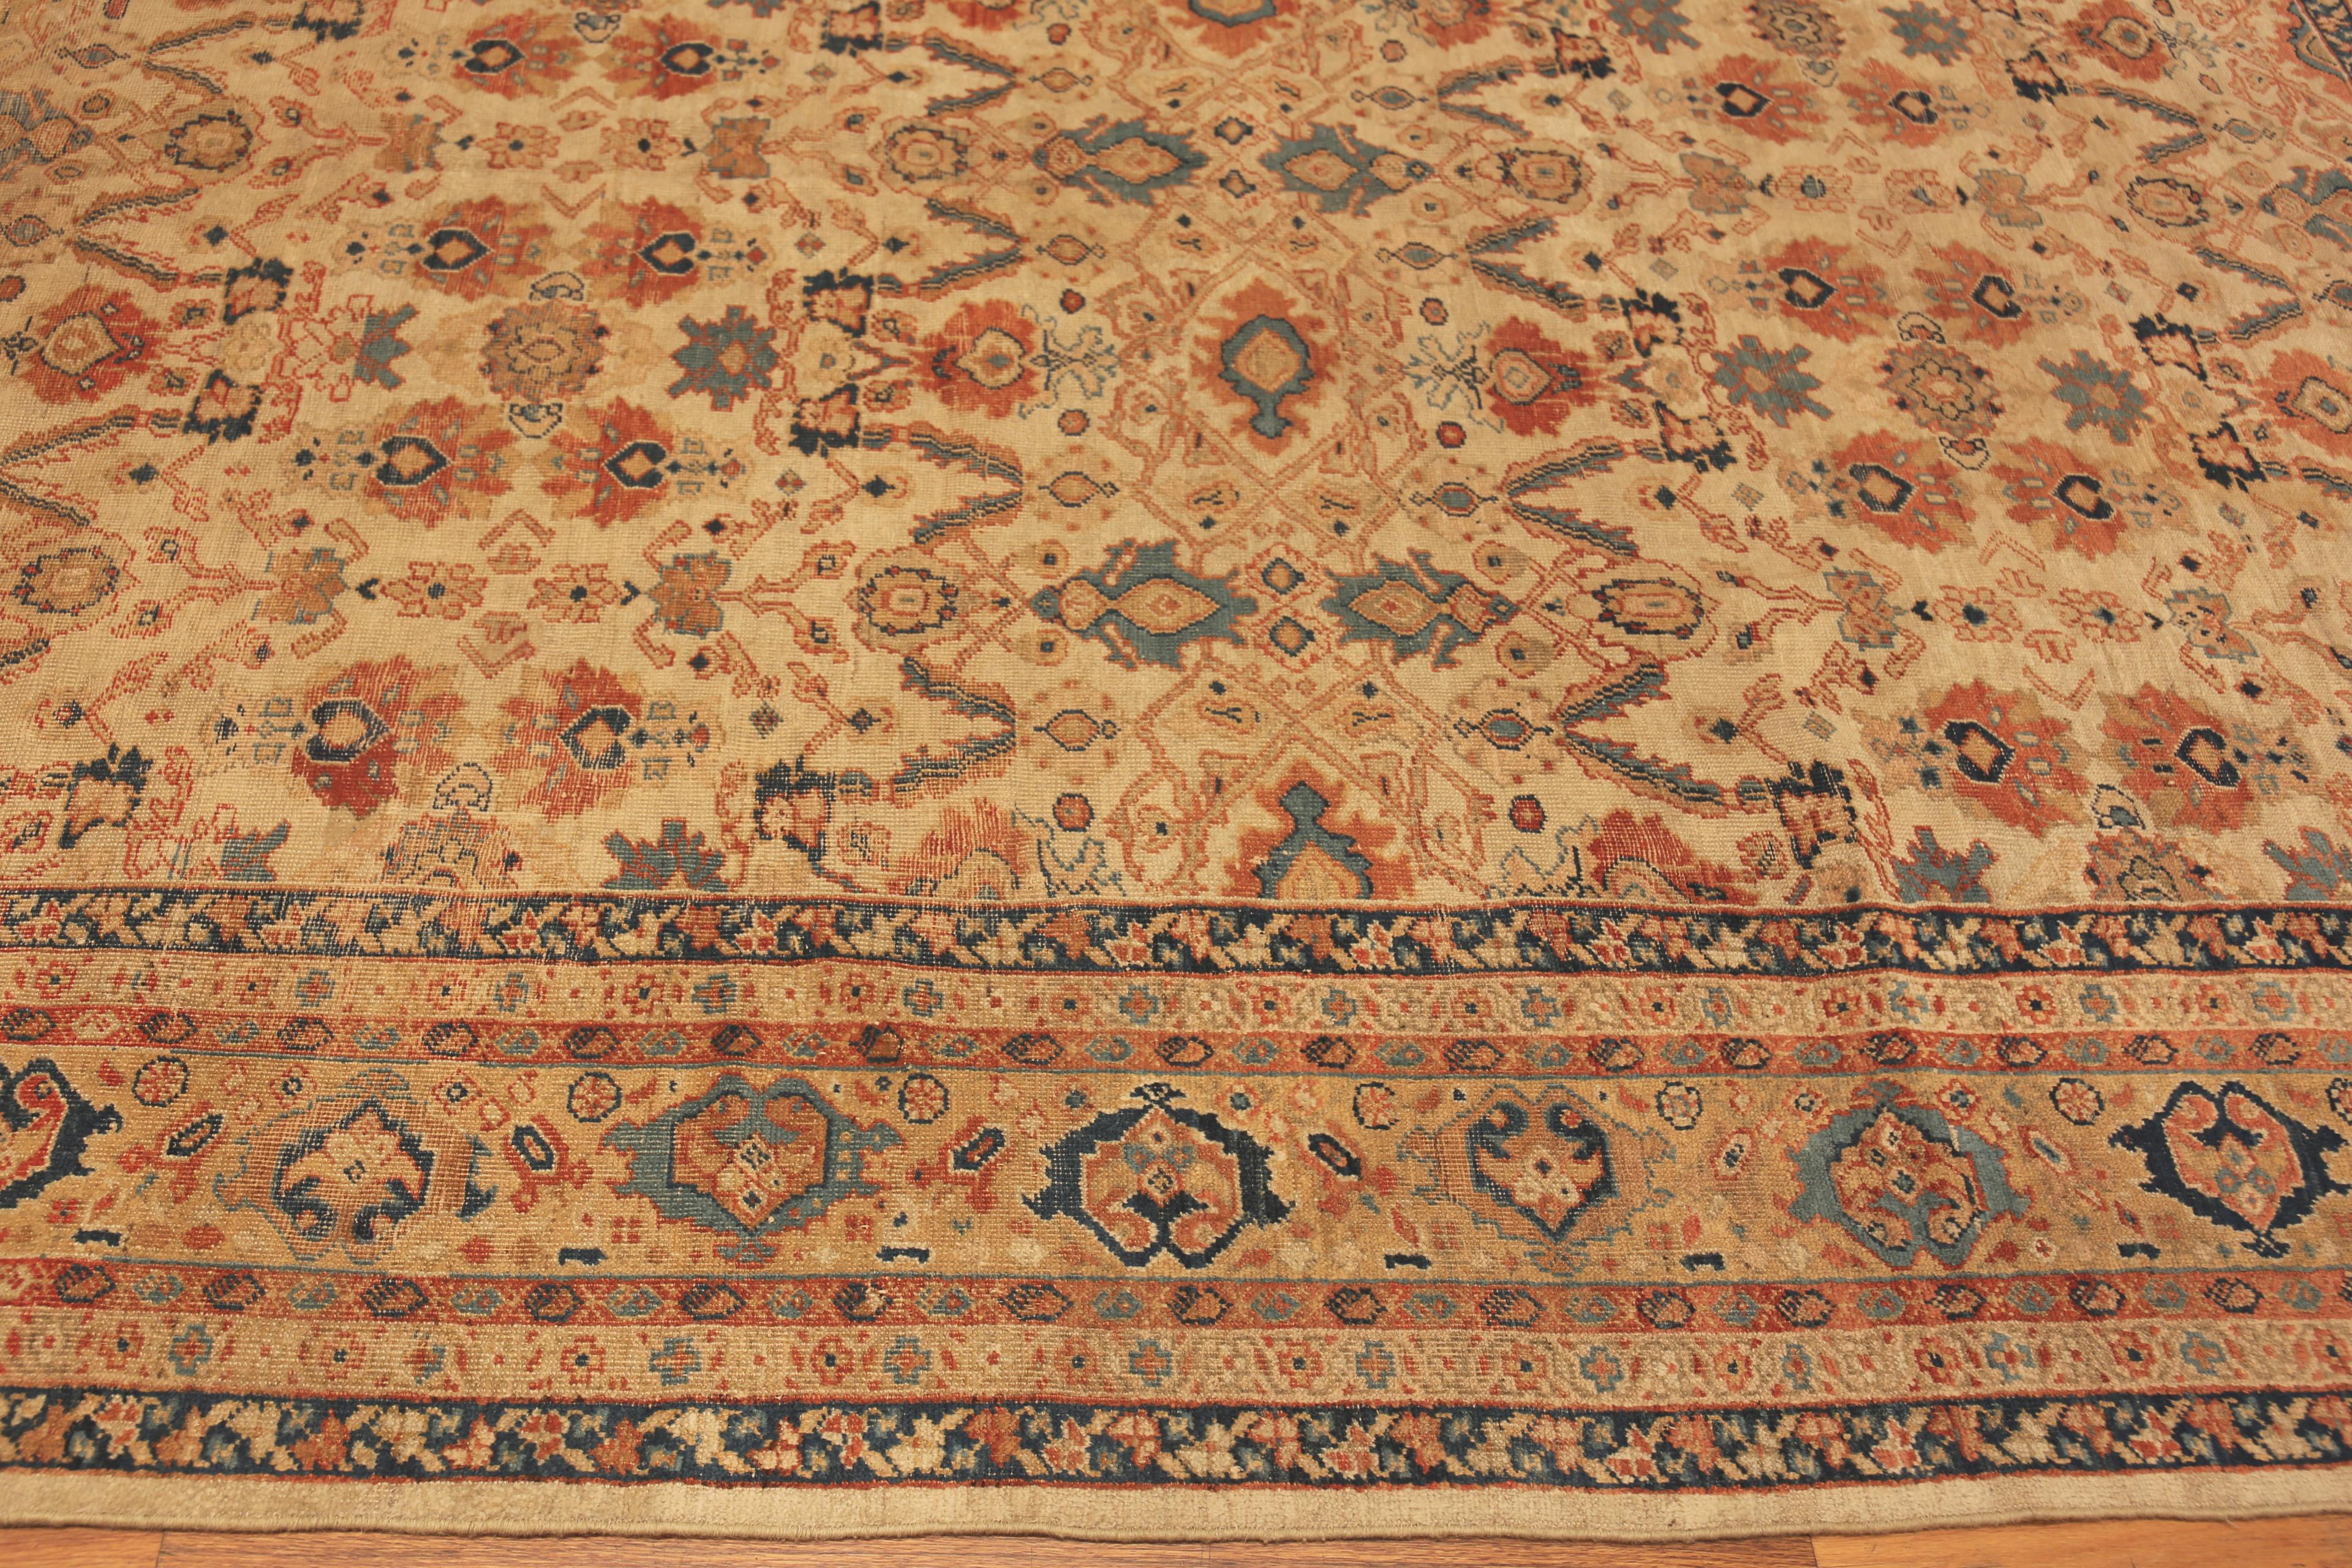 Antique Persian Mahal Rug, Country of origin: Persia, Circa date 1900. Size: 8 ft 9 in x 12 ft 6 in (2.67 m x 3.81 m)

